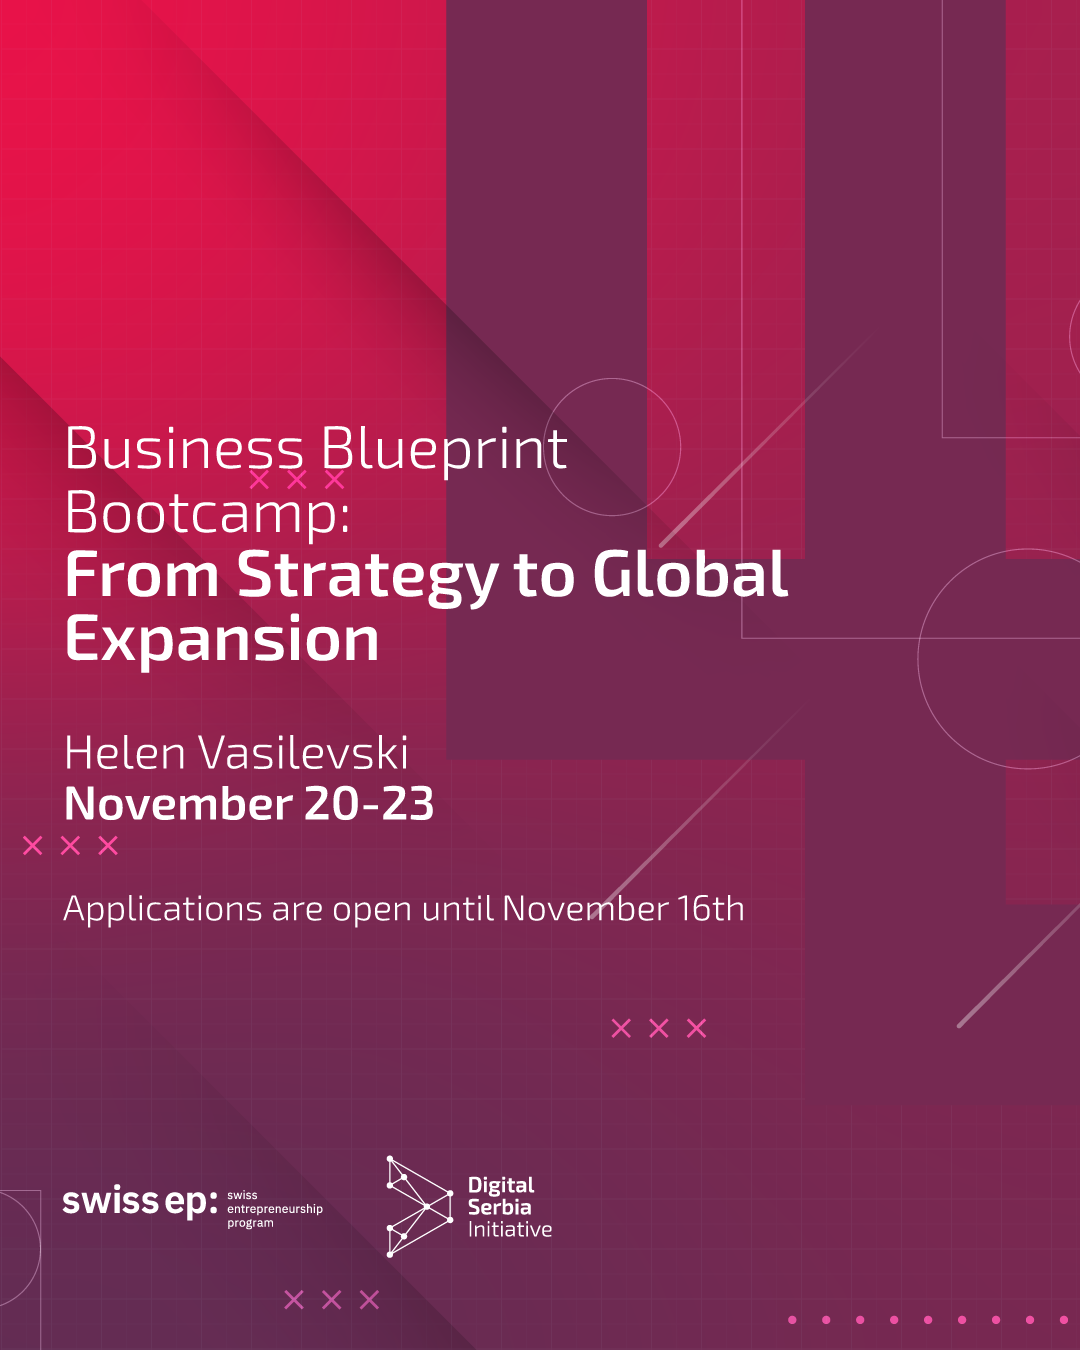 Business Blueprint Bootcamp: From Strategy to Global Expansion